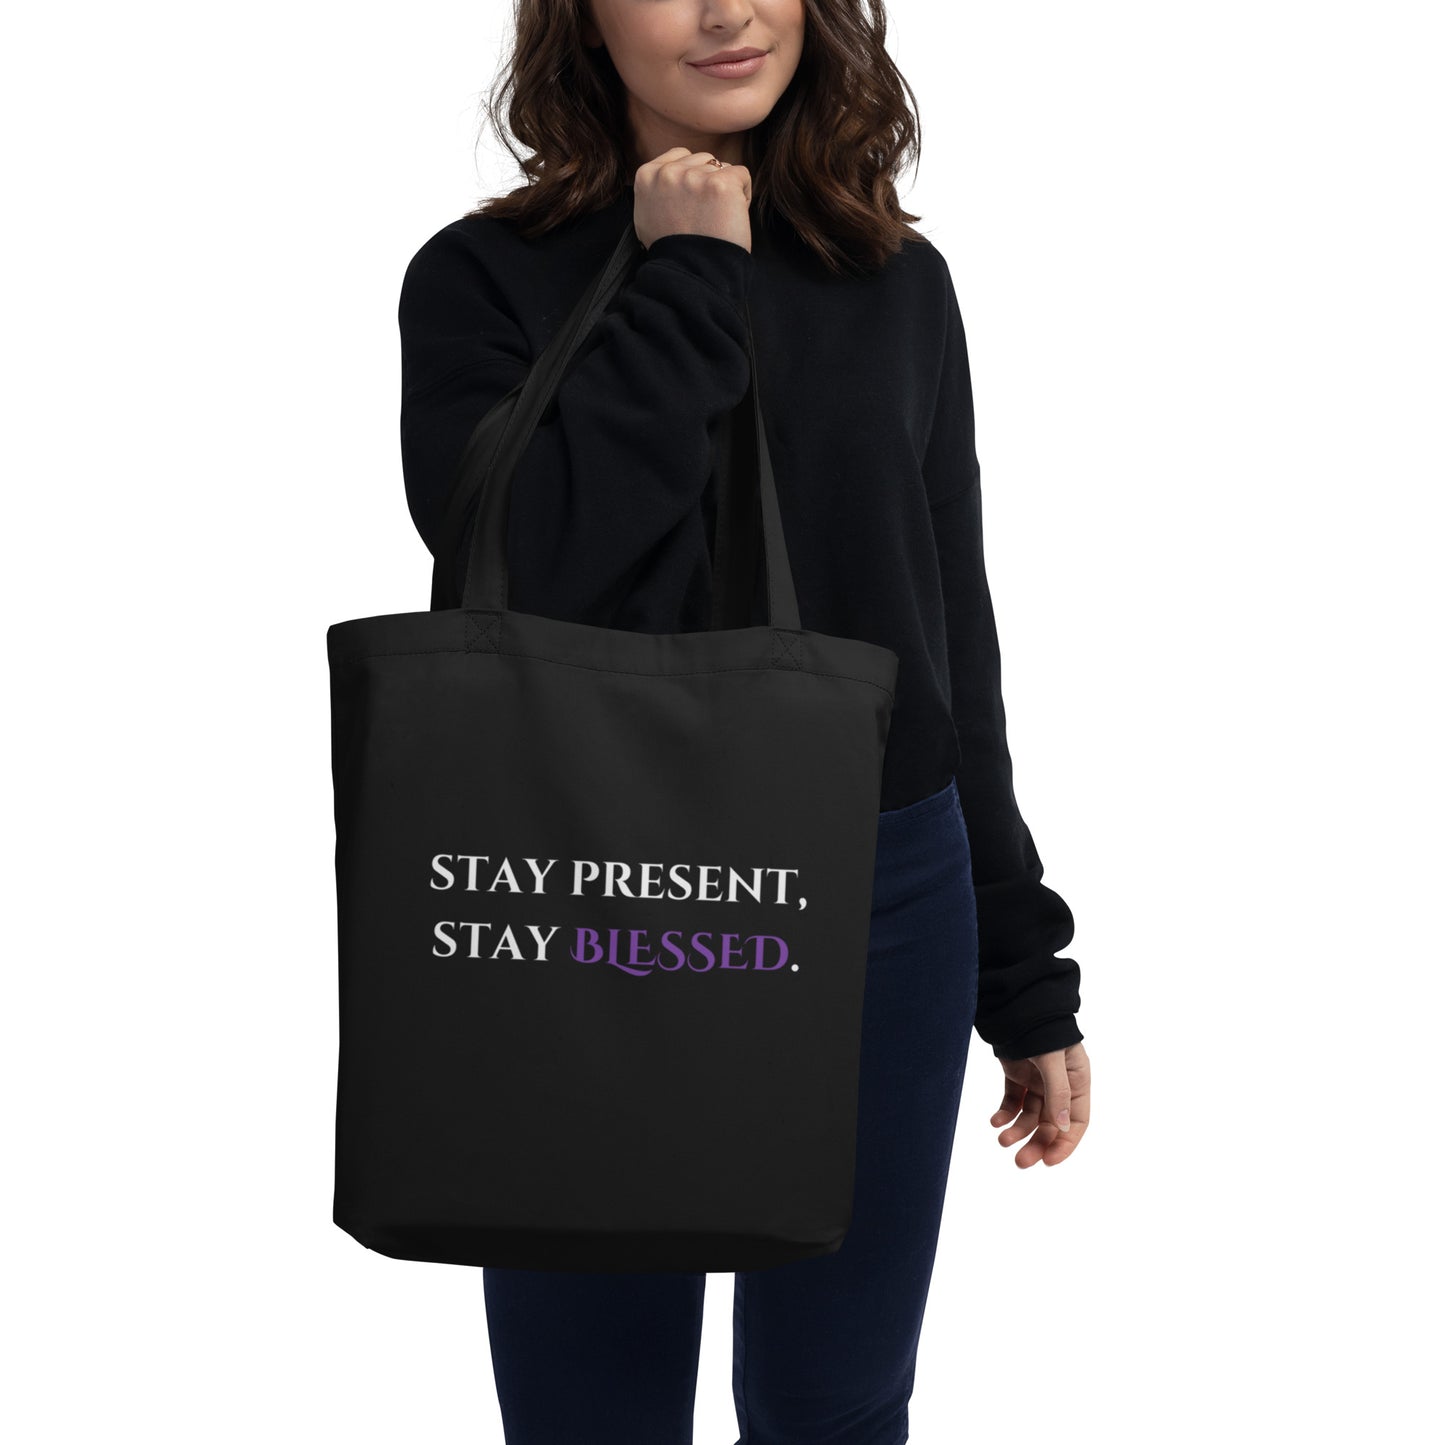 Stay present, stay BLESSED Black Eco Tote Bag